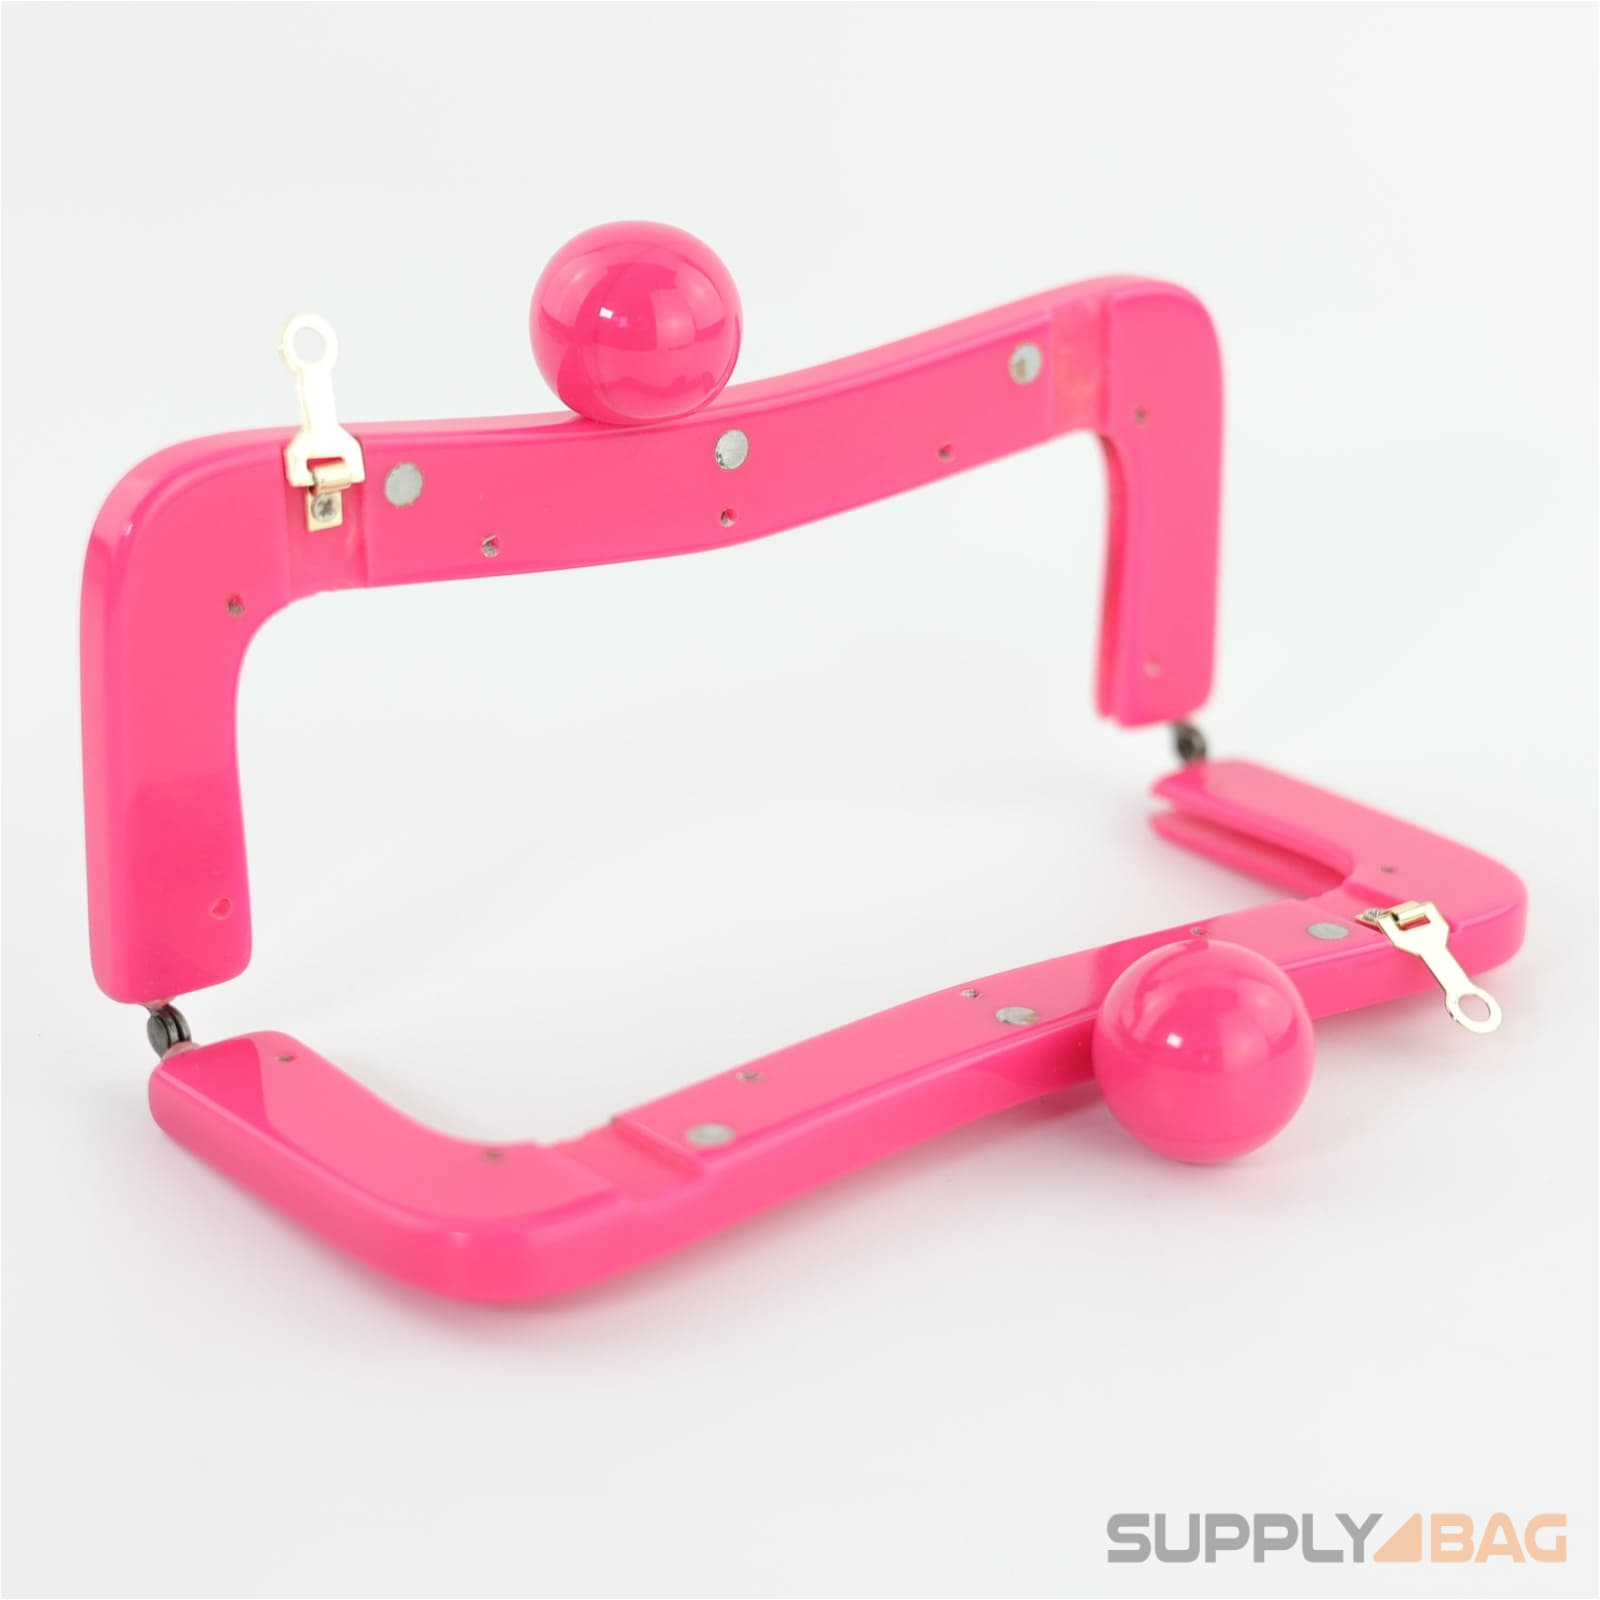 8 x 3 1/4 inch - deep pink acrylic purse frame with chain loops